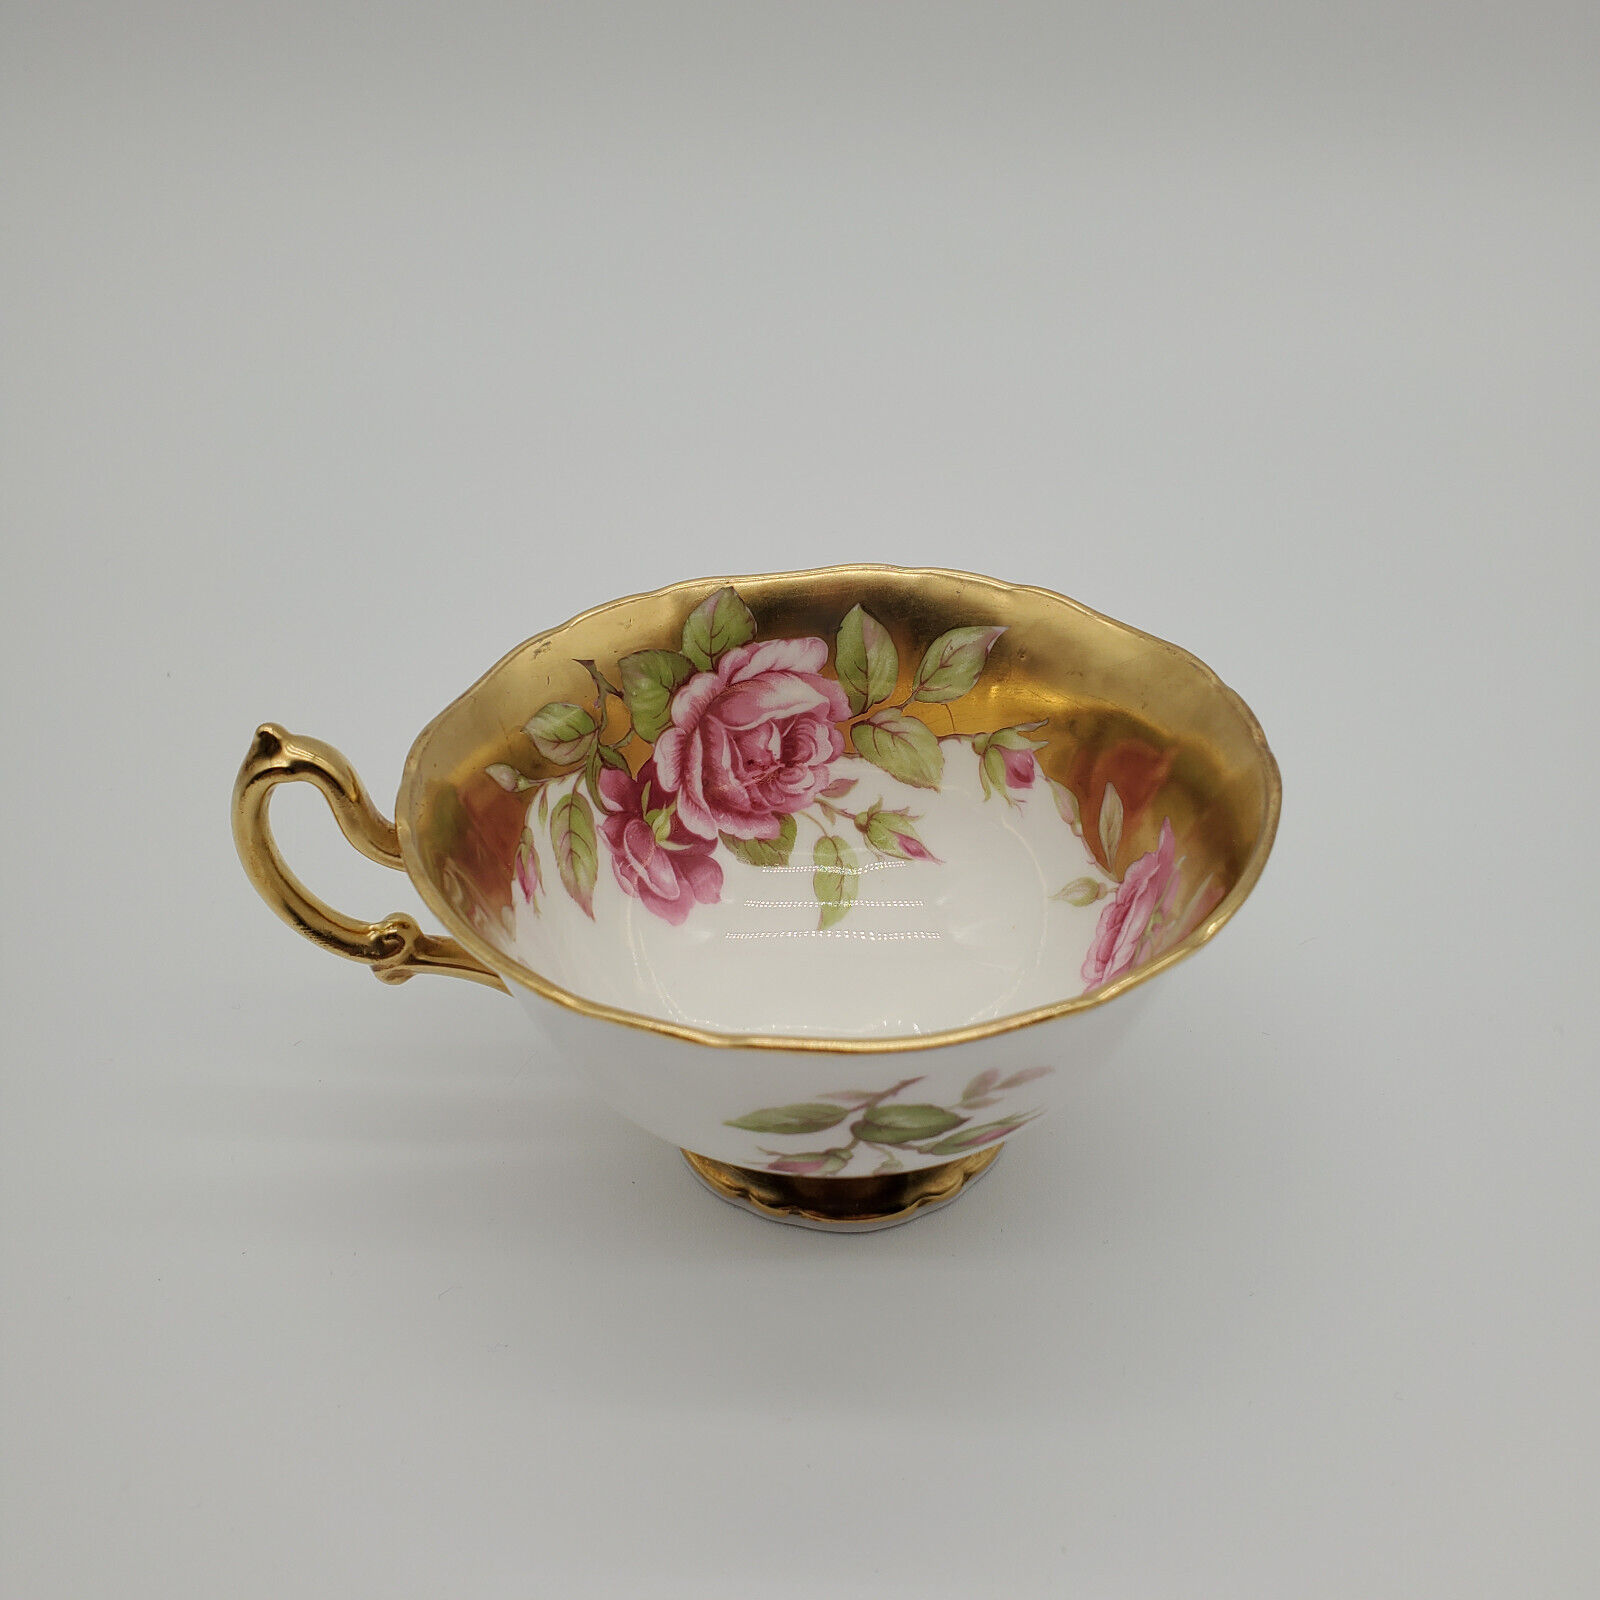 Vintage Adderley 1789 Fine Bone China Tea Cup with Gold Accents and Rose Design